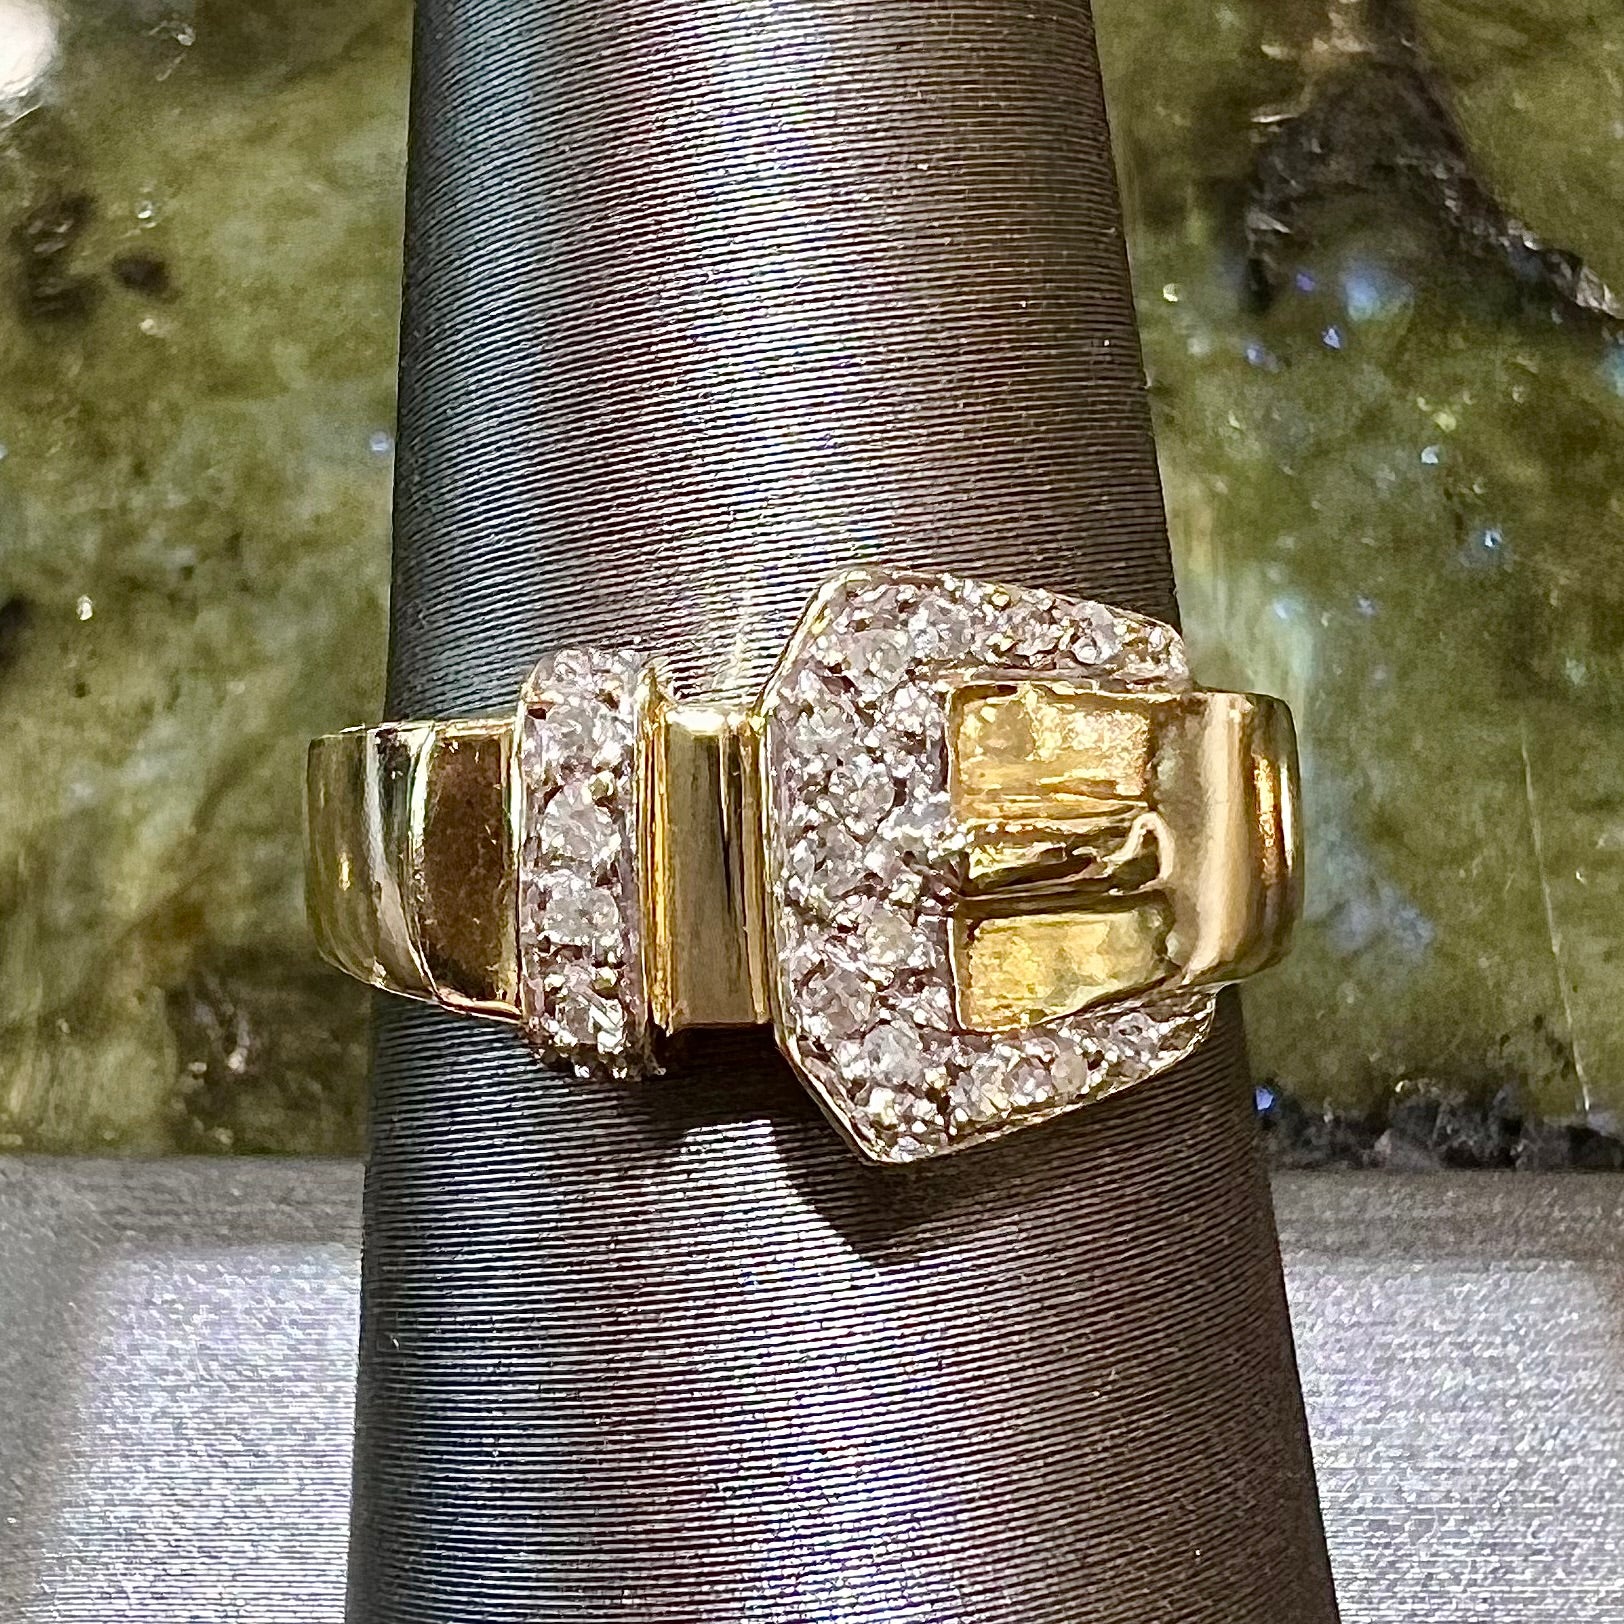 14 kt and 18 kt Gold Watch Band Buckles